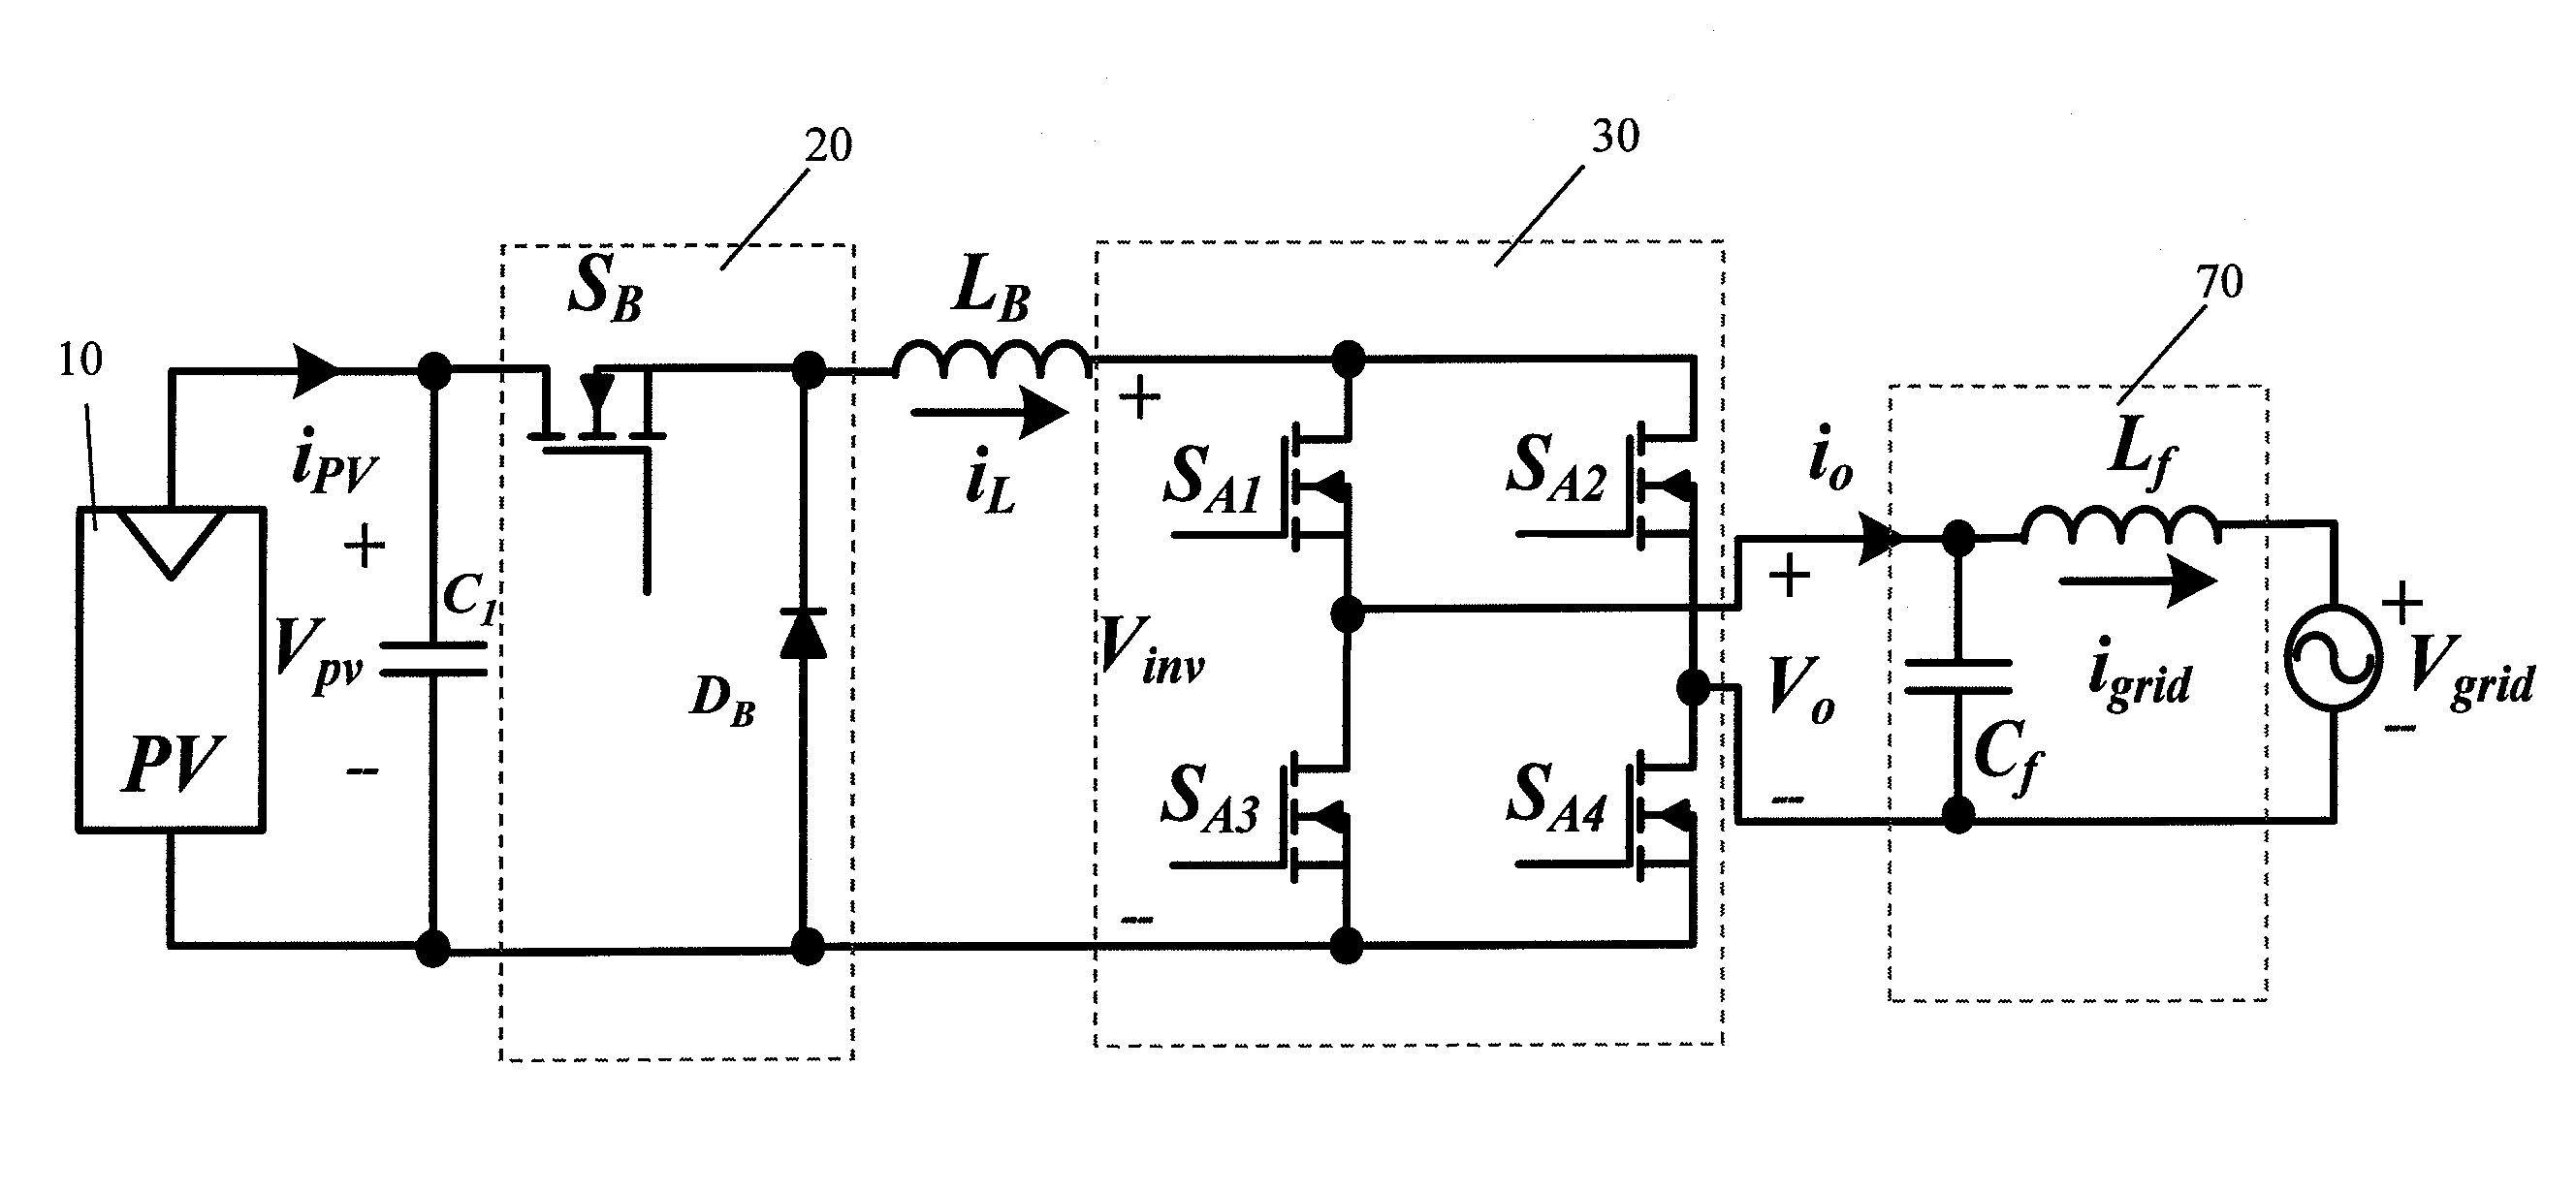 Inverter for a distributed power generator